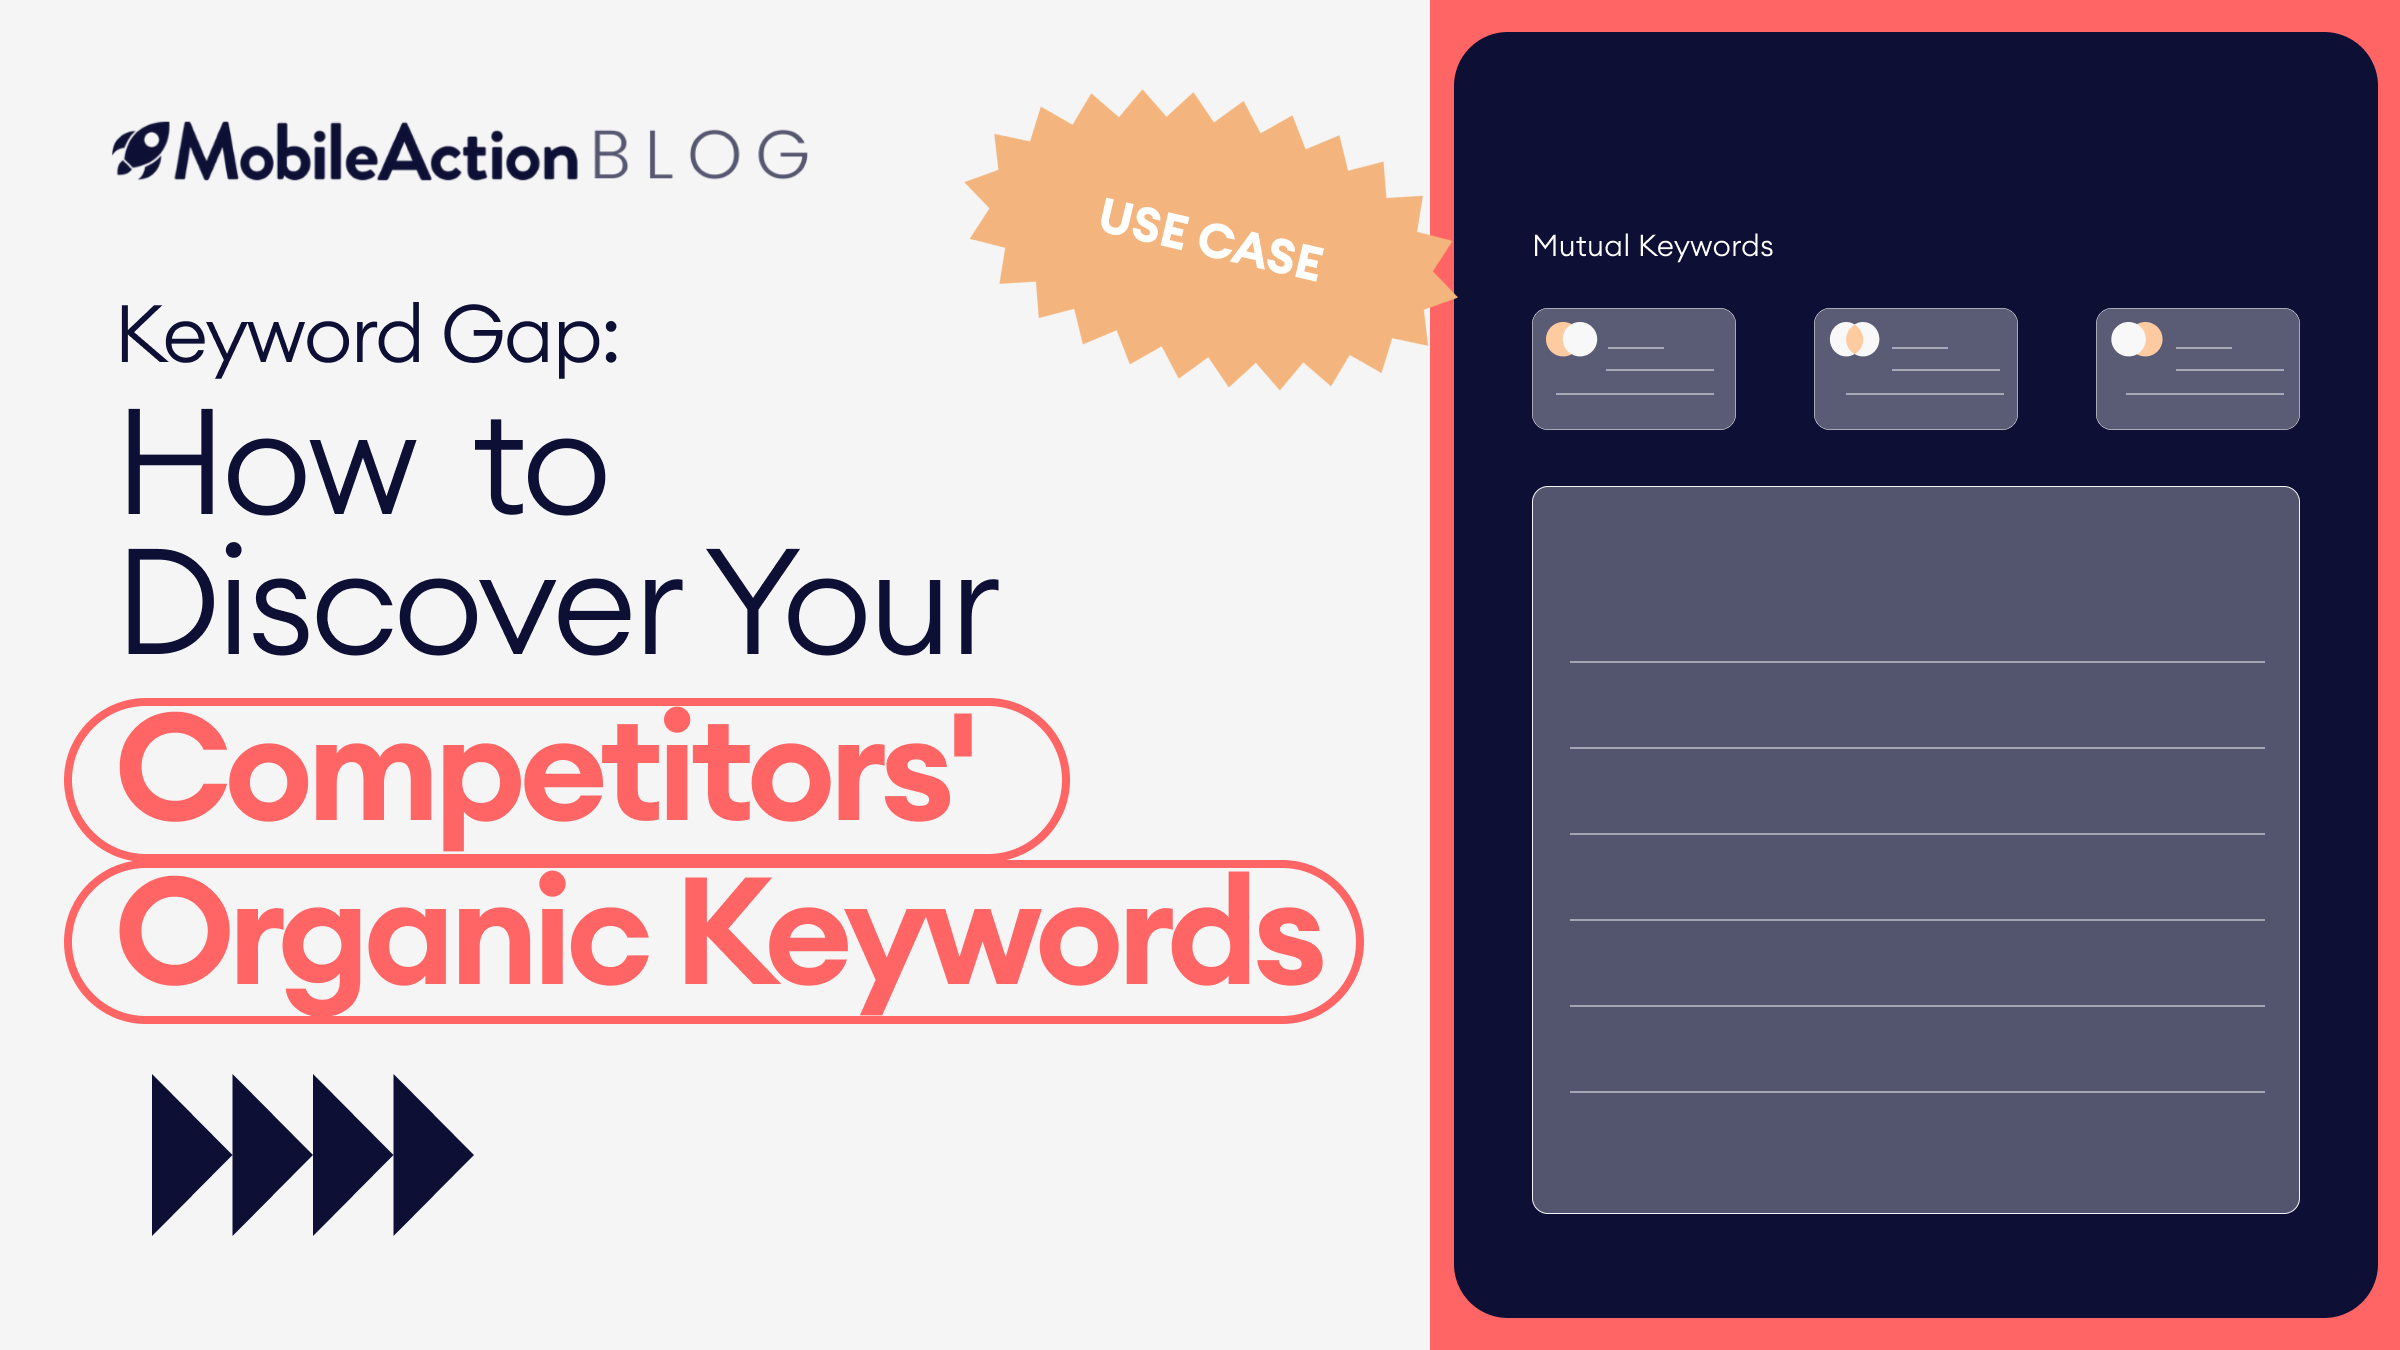 Keyword Gap: How to Discover Your Competitors Organic Keywords